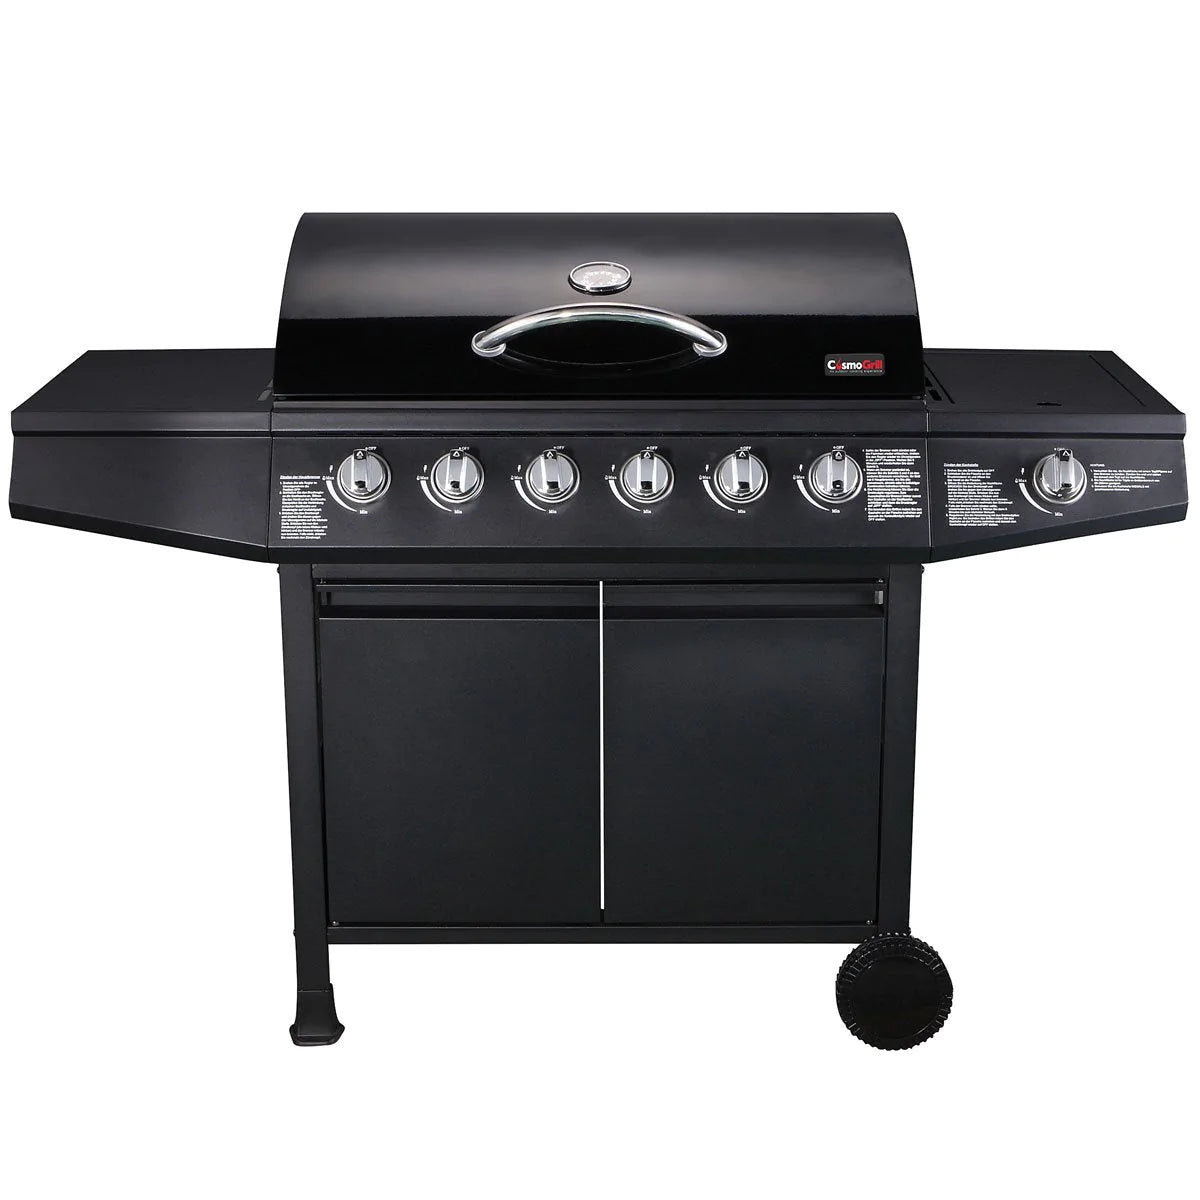 CosmoGrill Original Series 6+1 Gas Barbecue Front View